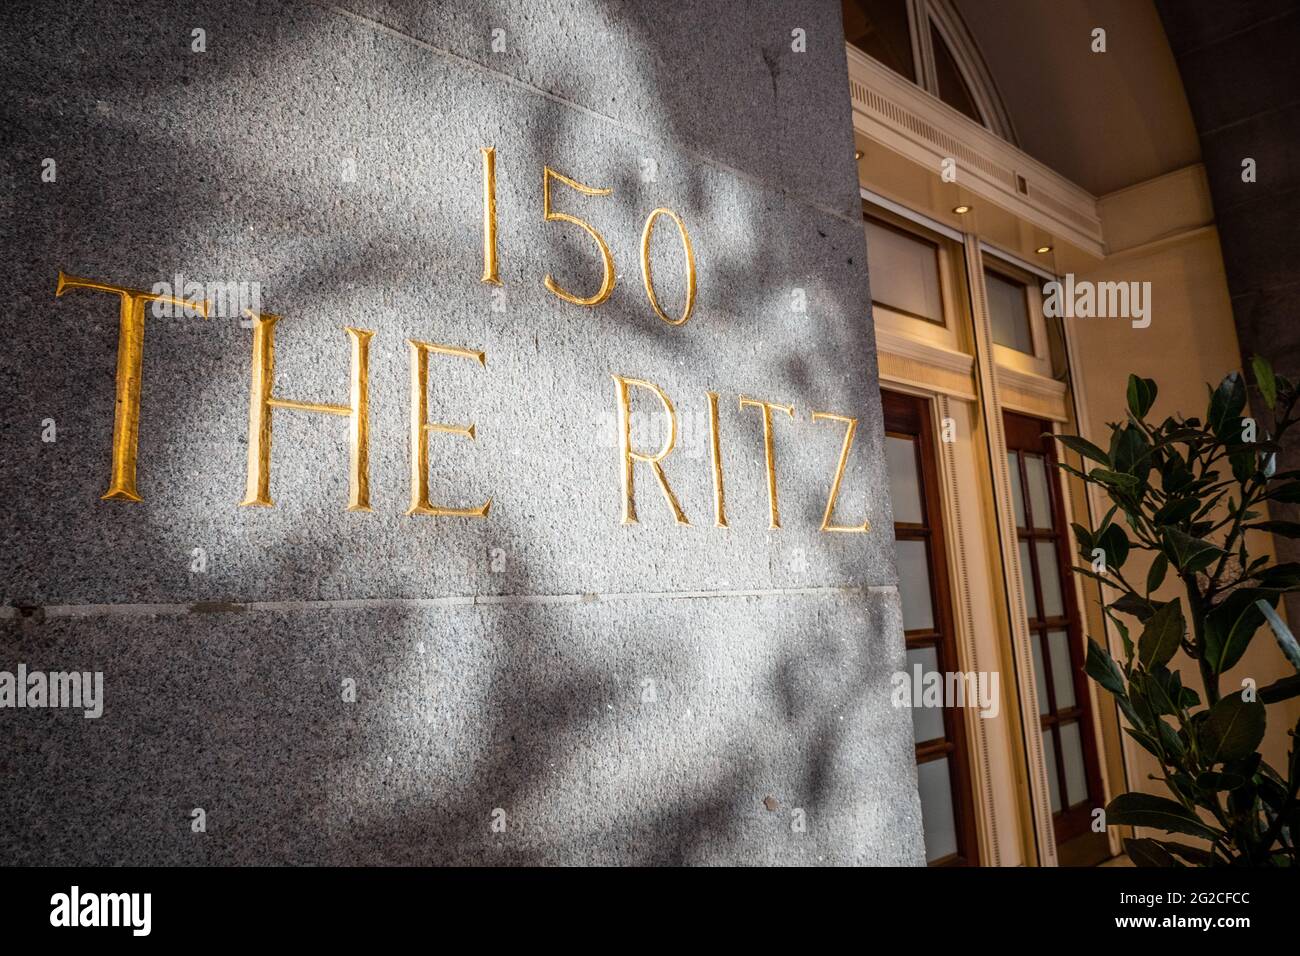 150 The Ritz, London. The 5-star grade II listed London hotel on Piccadilly which has become a symbol of high society and luxury. Stock Photo